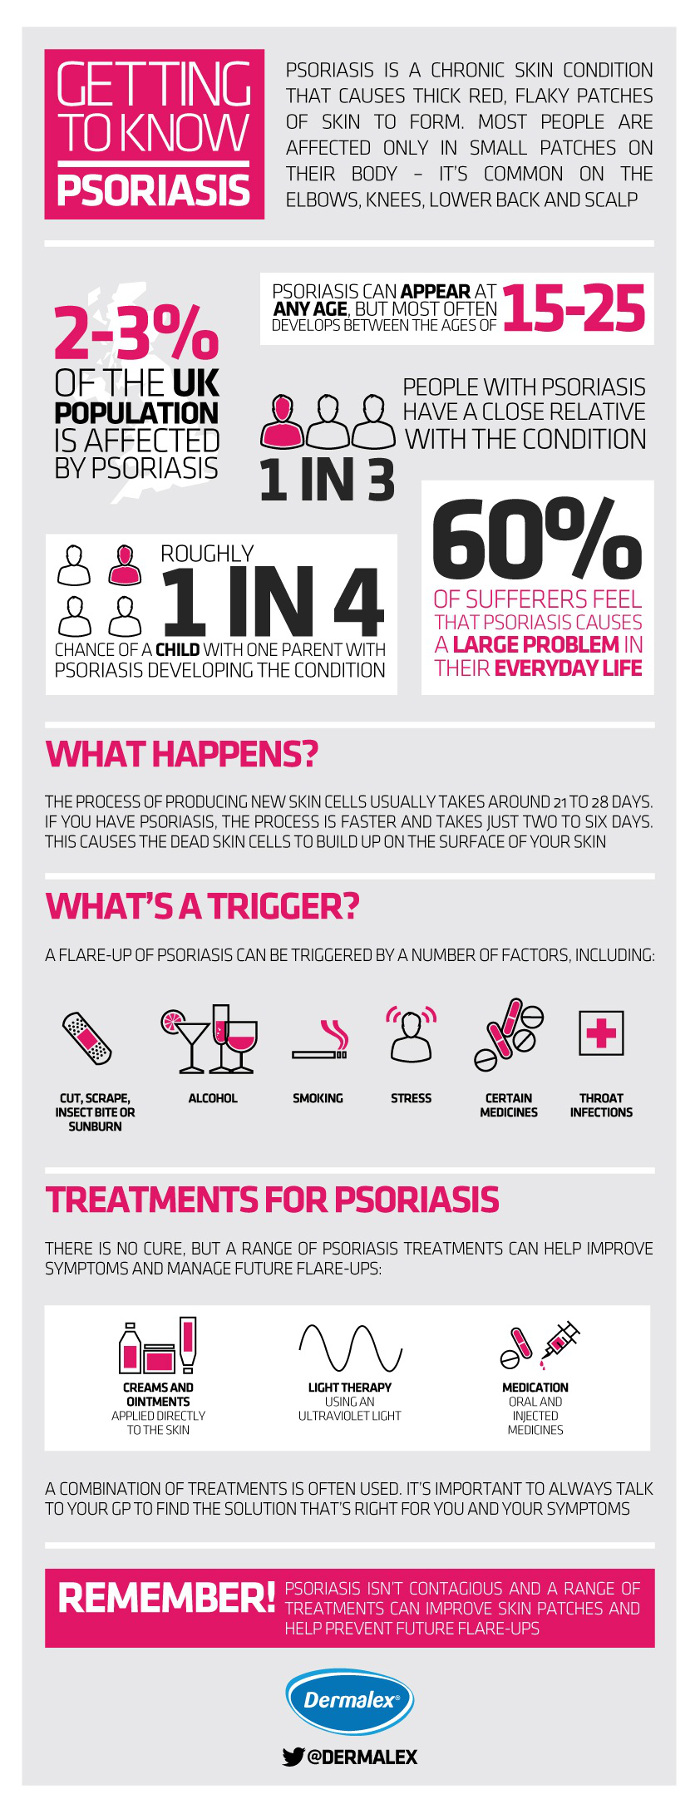 Getting To Know Psoriasis